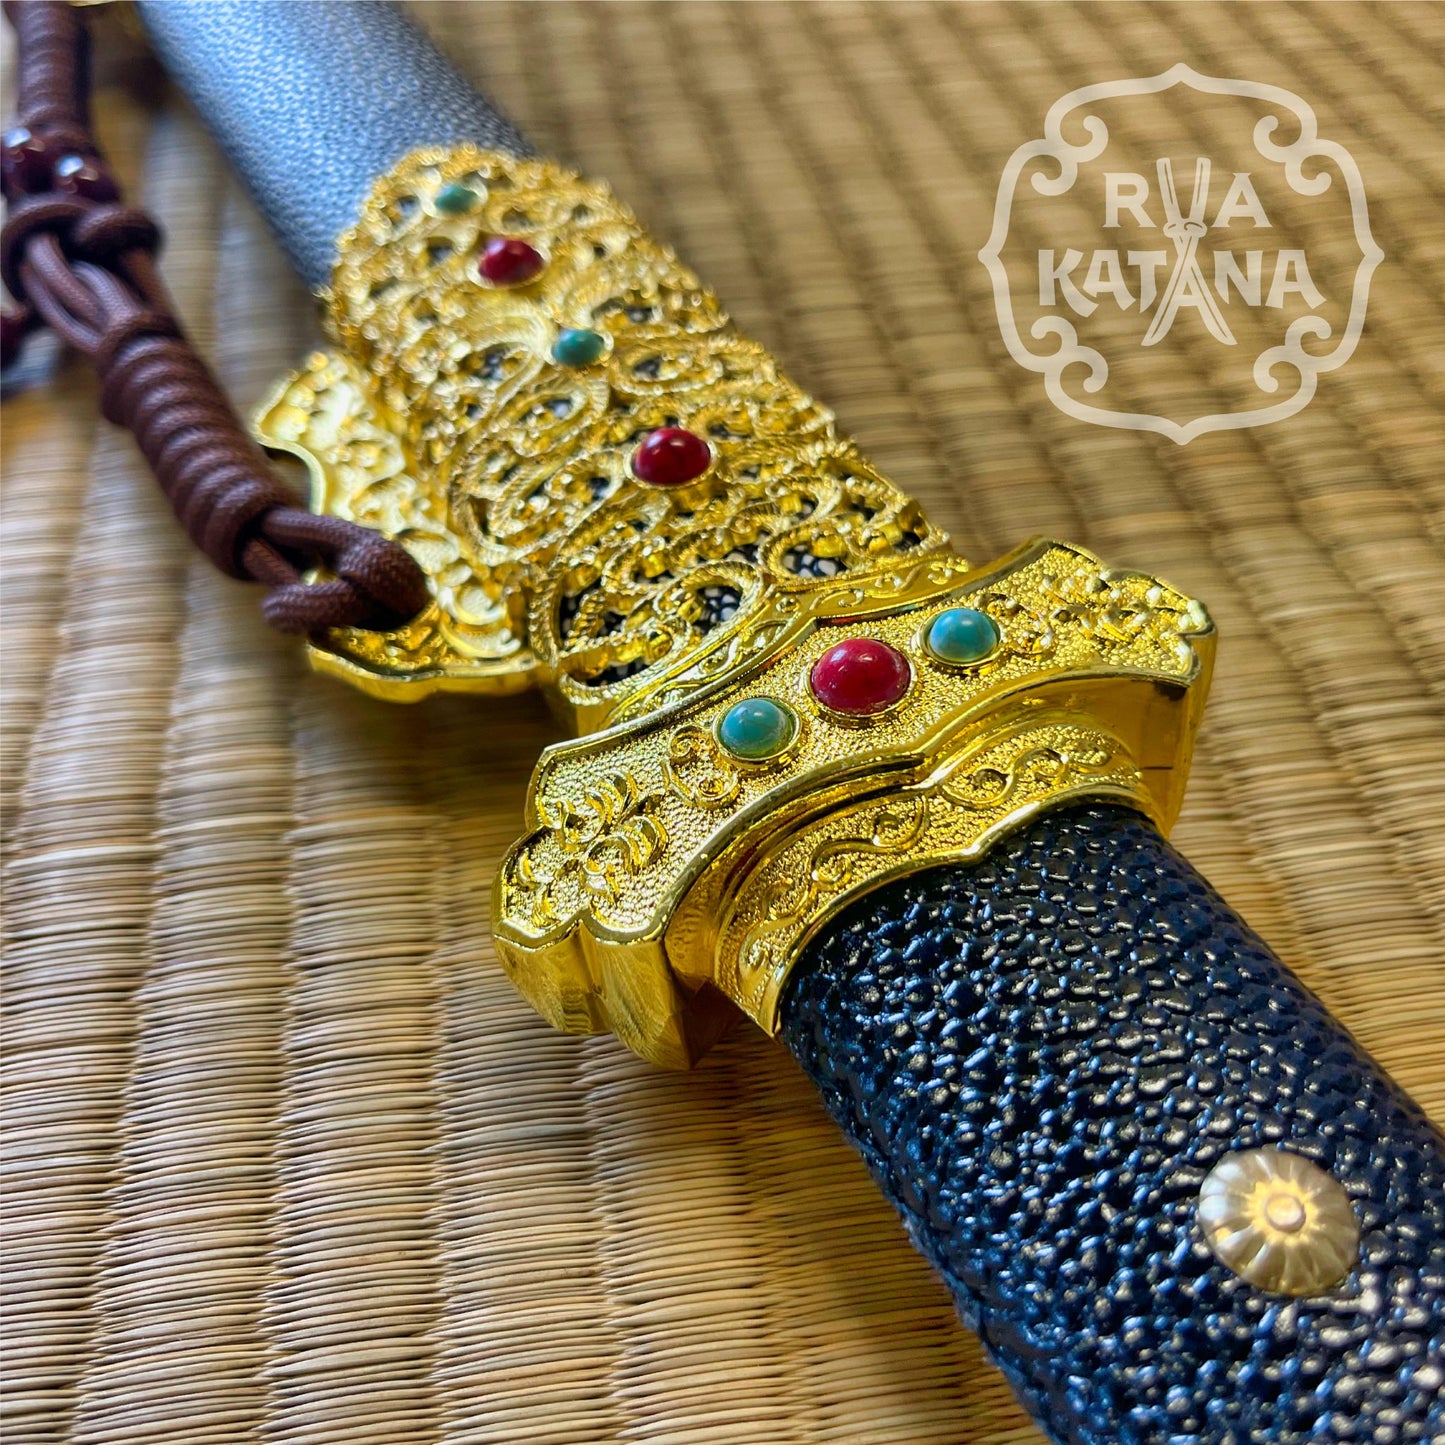 Jian - Damascus with Gold Fittings